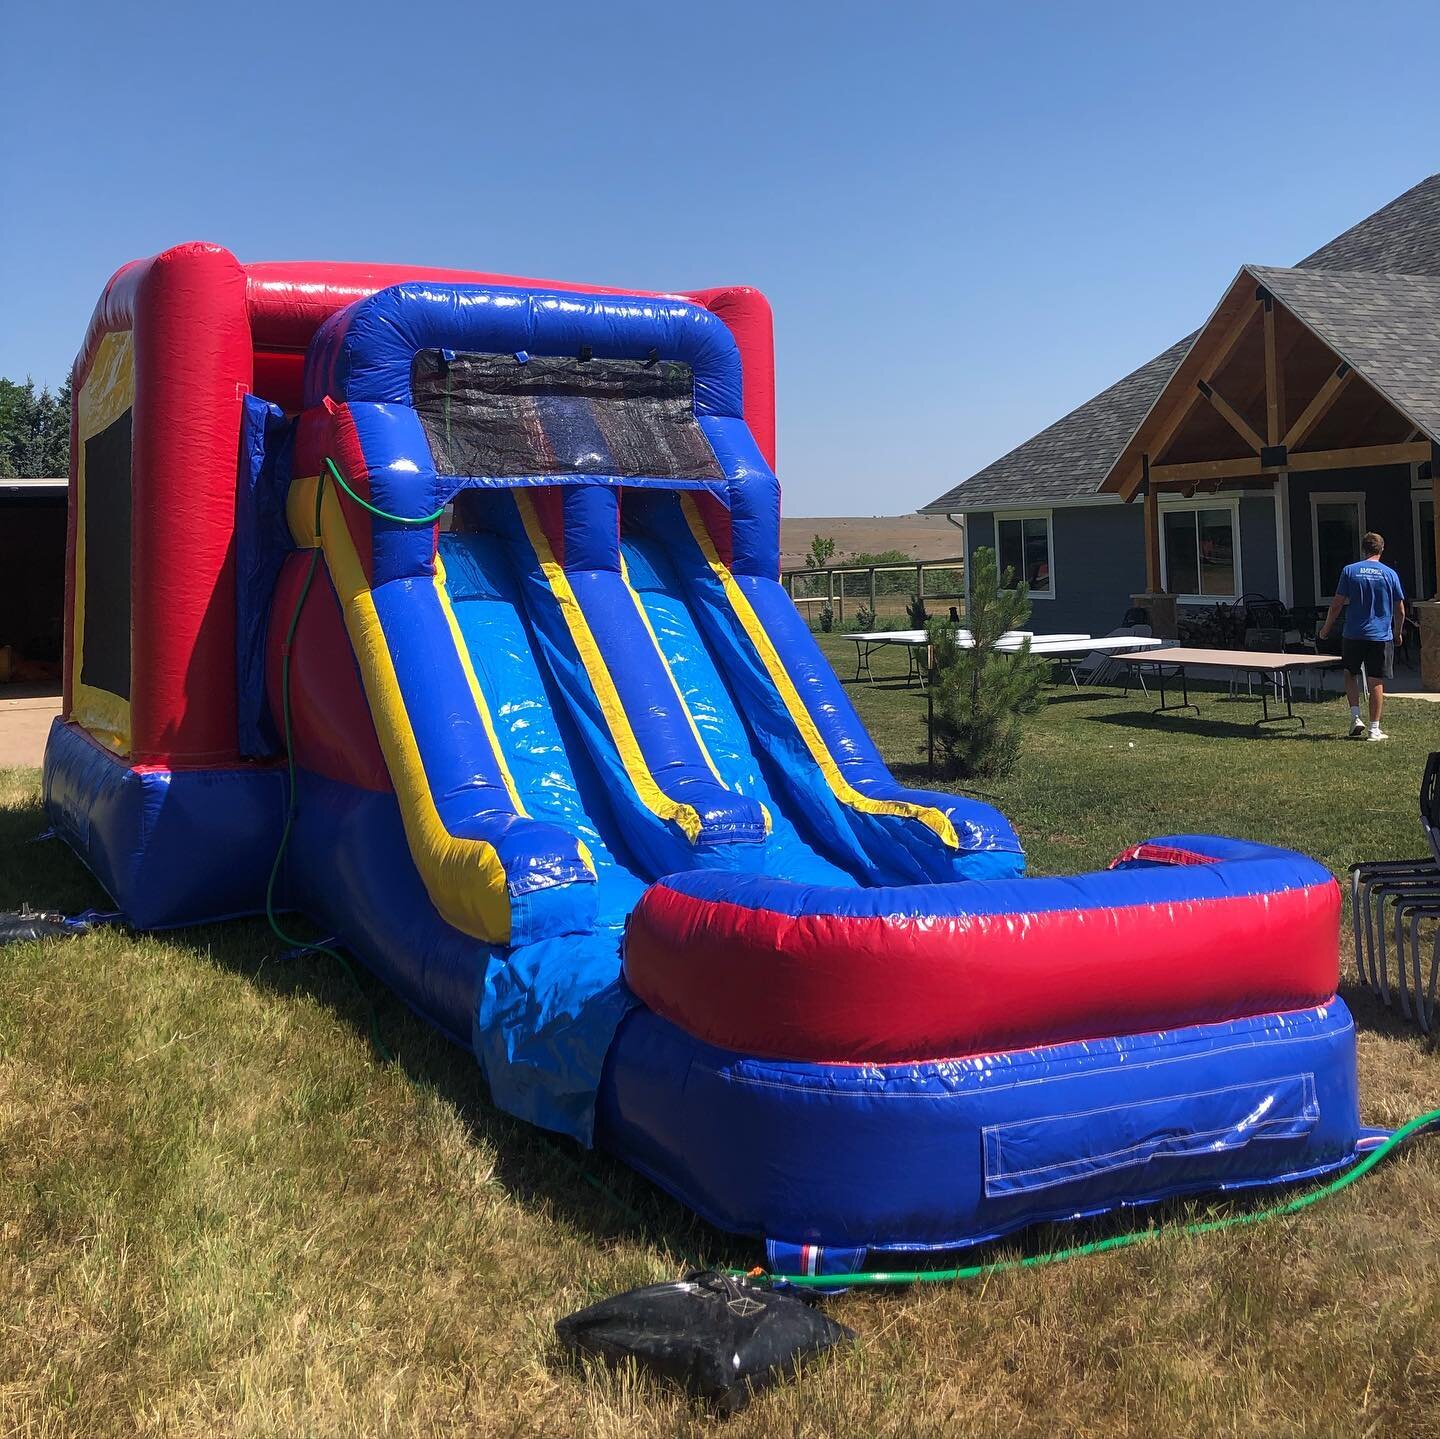 Don&rsquo;t forget Powder River Party Rentals also does inflatables! A fun and entertaining addition to any celebration! 
Call to book today! 
(307) 752-6111 #inflatables #rentals #partyrentals